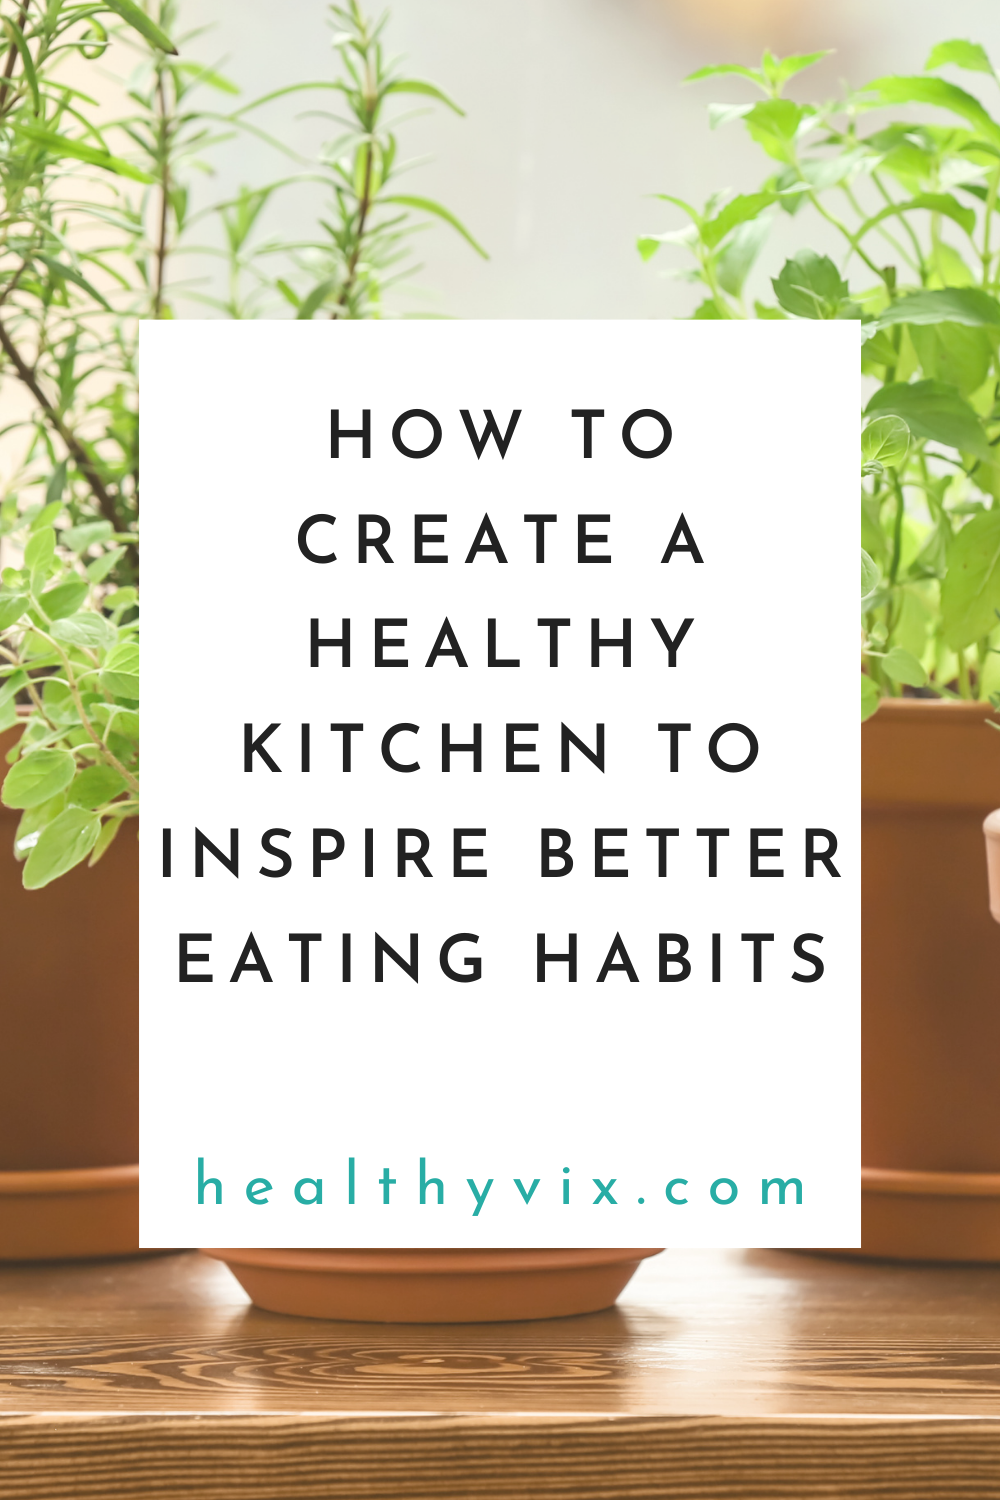 How to create a healthy kitchen to inspire better eating habits